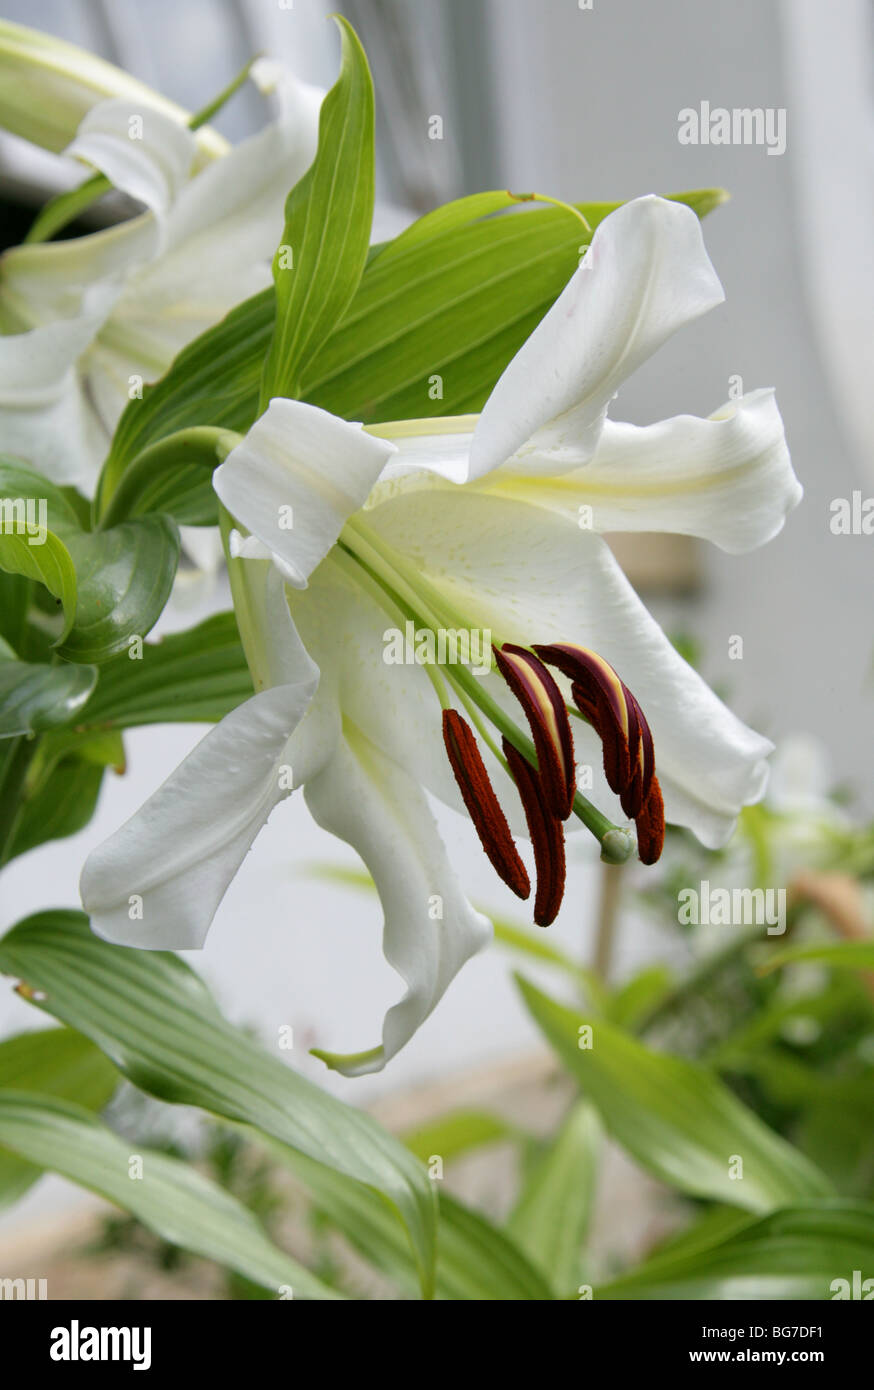 Golden Rayed Lily of Japan, Goldband Lily, Lilium or Species Lily, Lilium auratum, Liliaceae, Japan, Asia Stock Photo